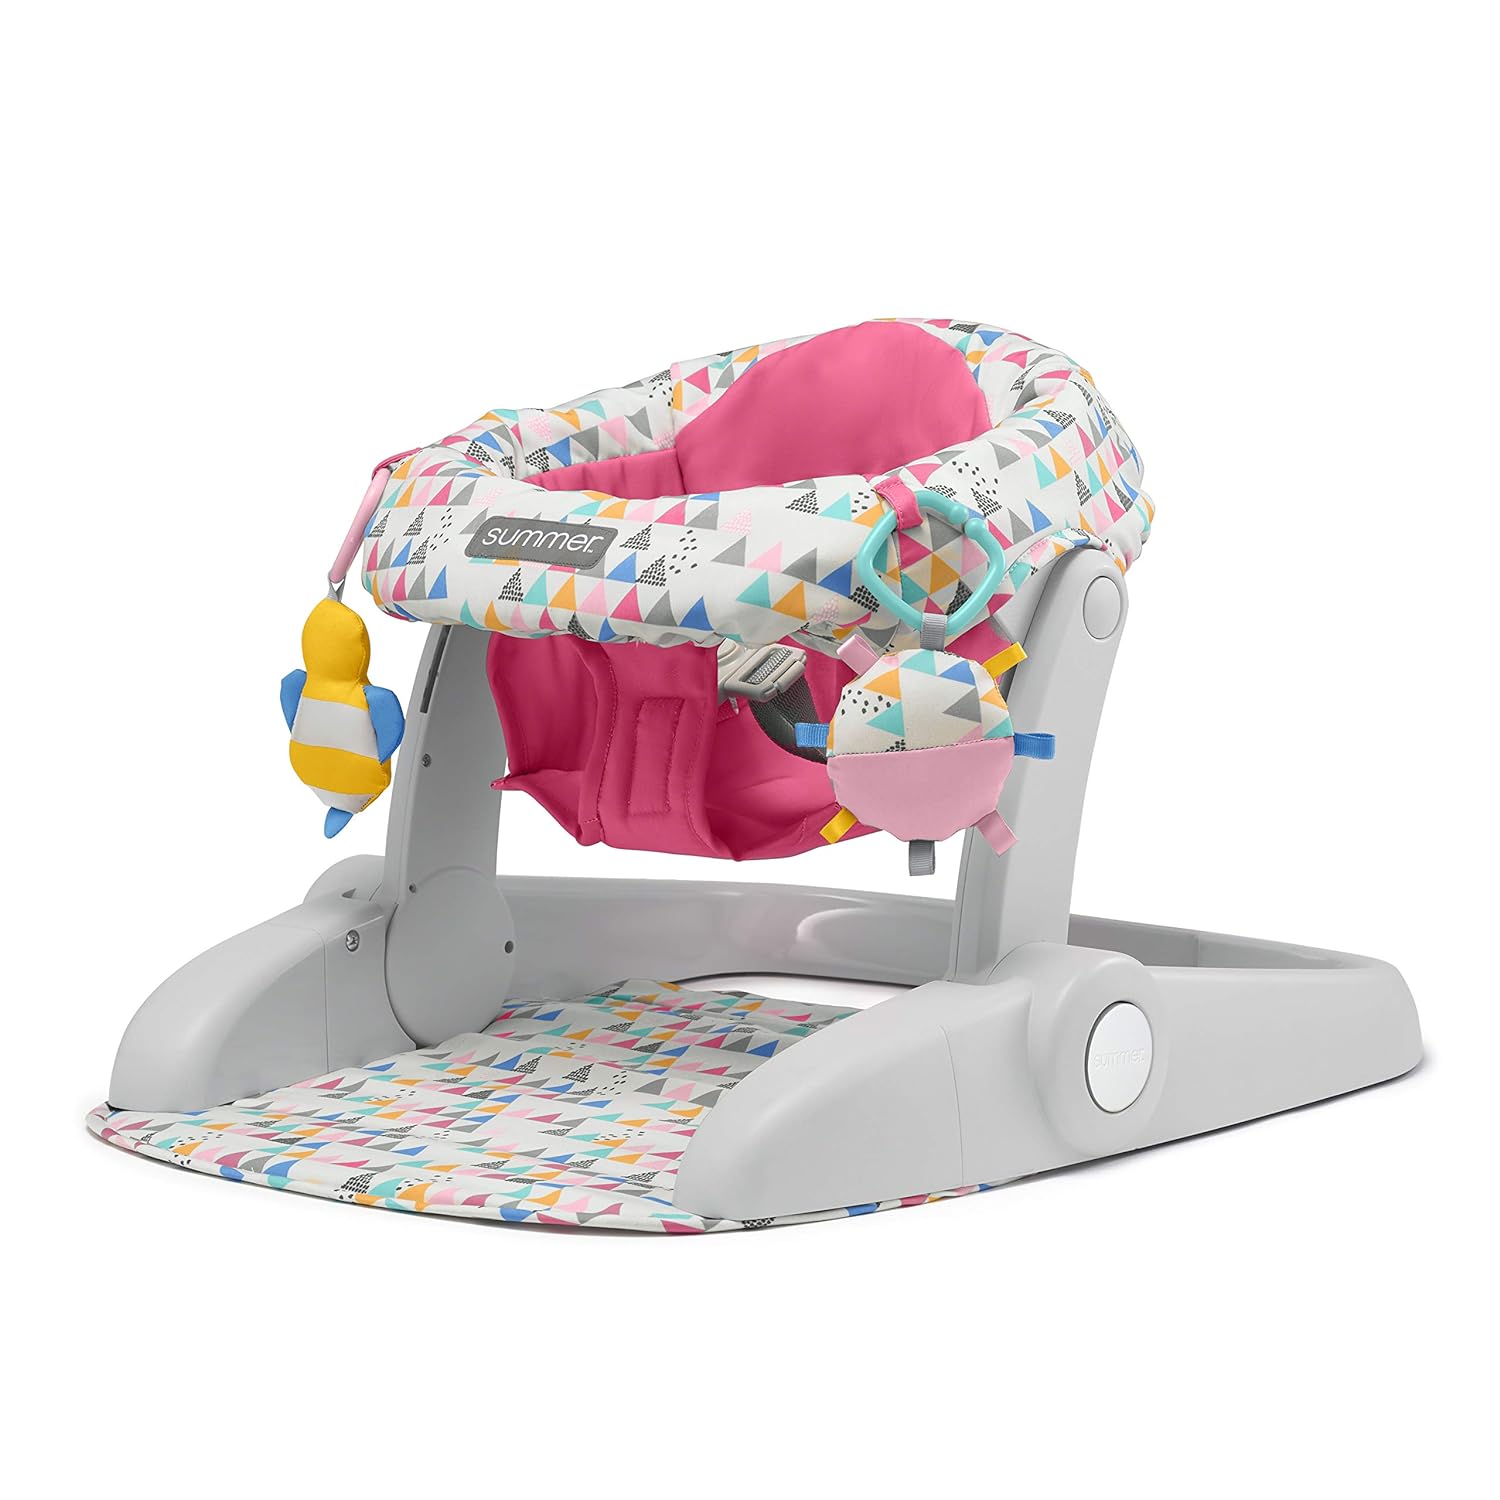 Summer Infant Learn-to-Sit 2-Position Floor Seat (Funfetti Pink) Sit Baby Up in This Adjustable Baby Activity Seat Appropriate for Ages Months Includes Toys - image 1 of 6